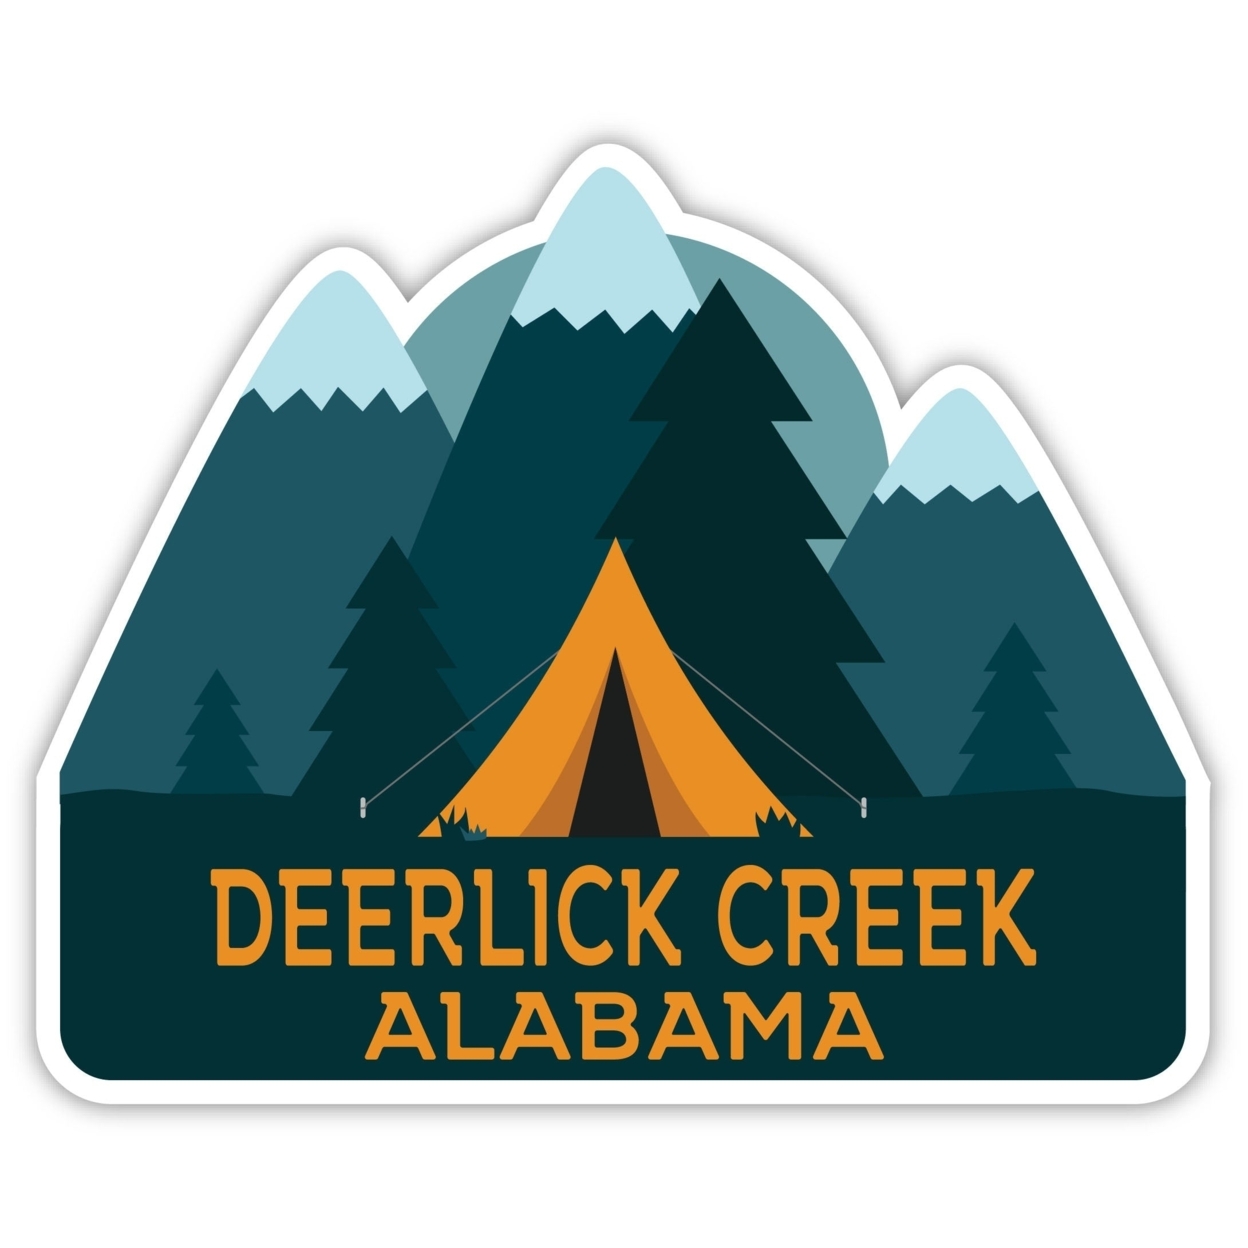 Deerlick Creek Alabama Souvenir Decorative Stickers (Choose Theme And Size) - 4-Pack, 4-Inch, Great Outdoors